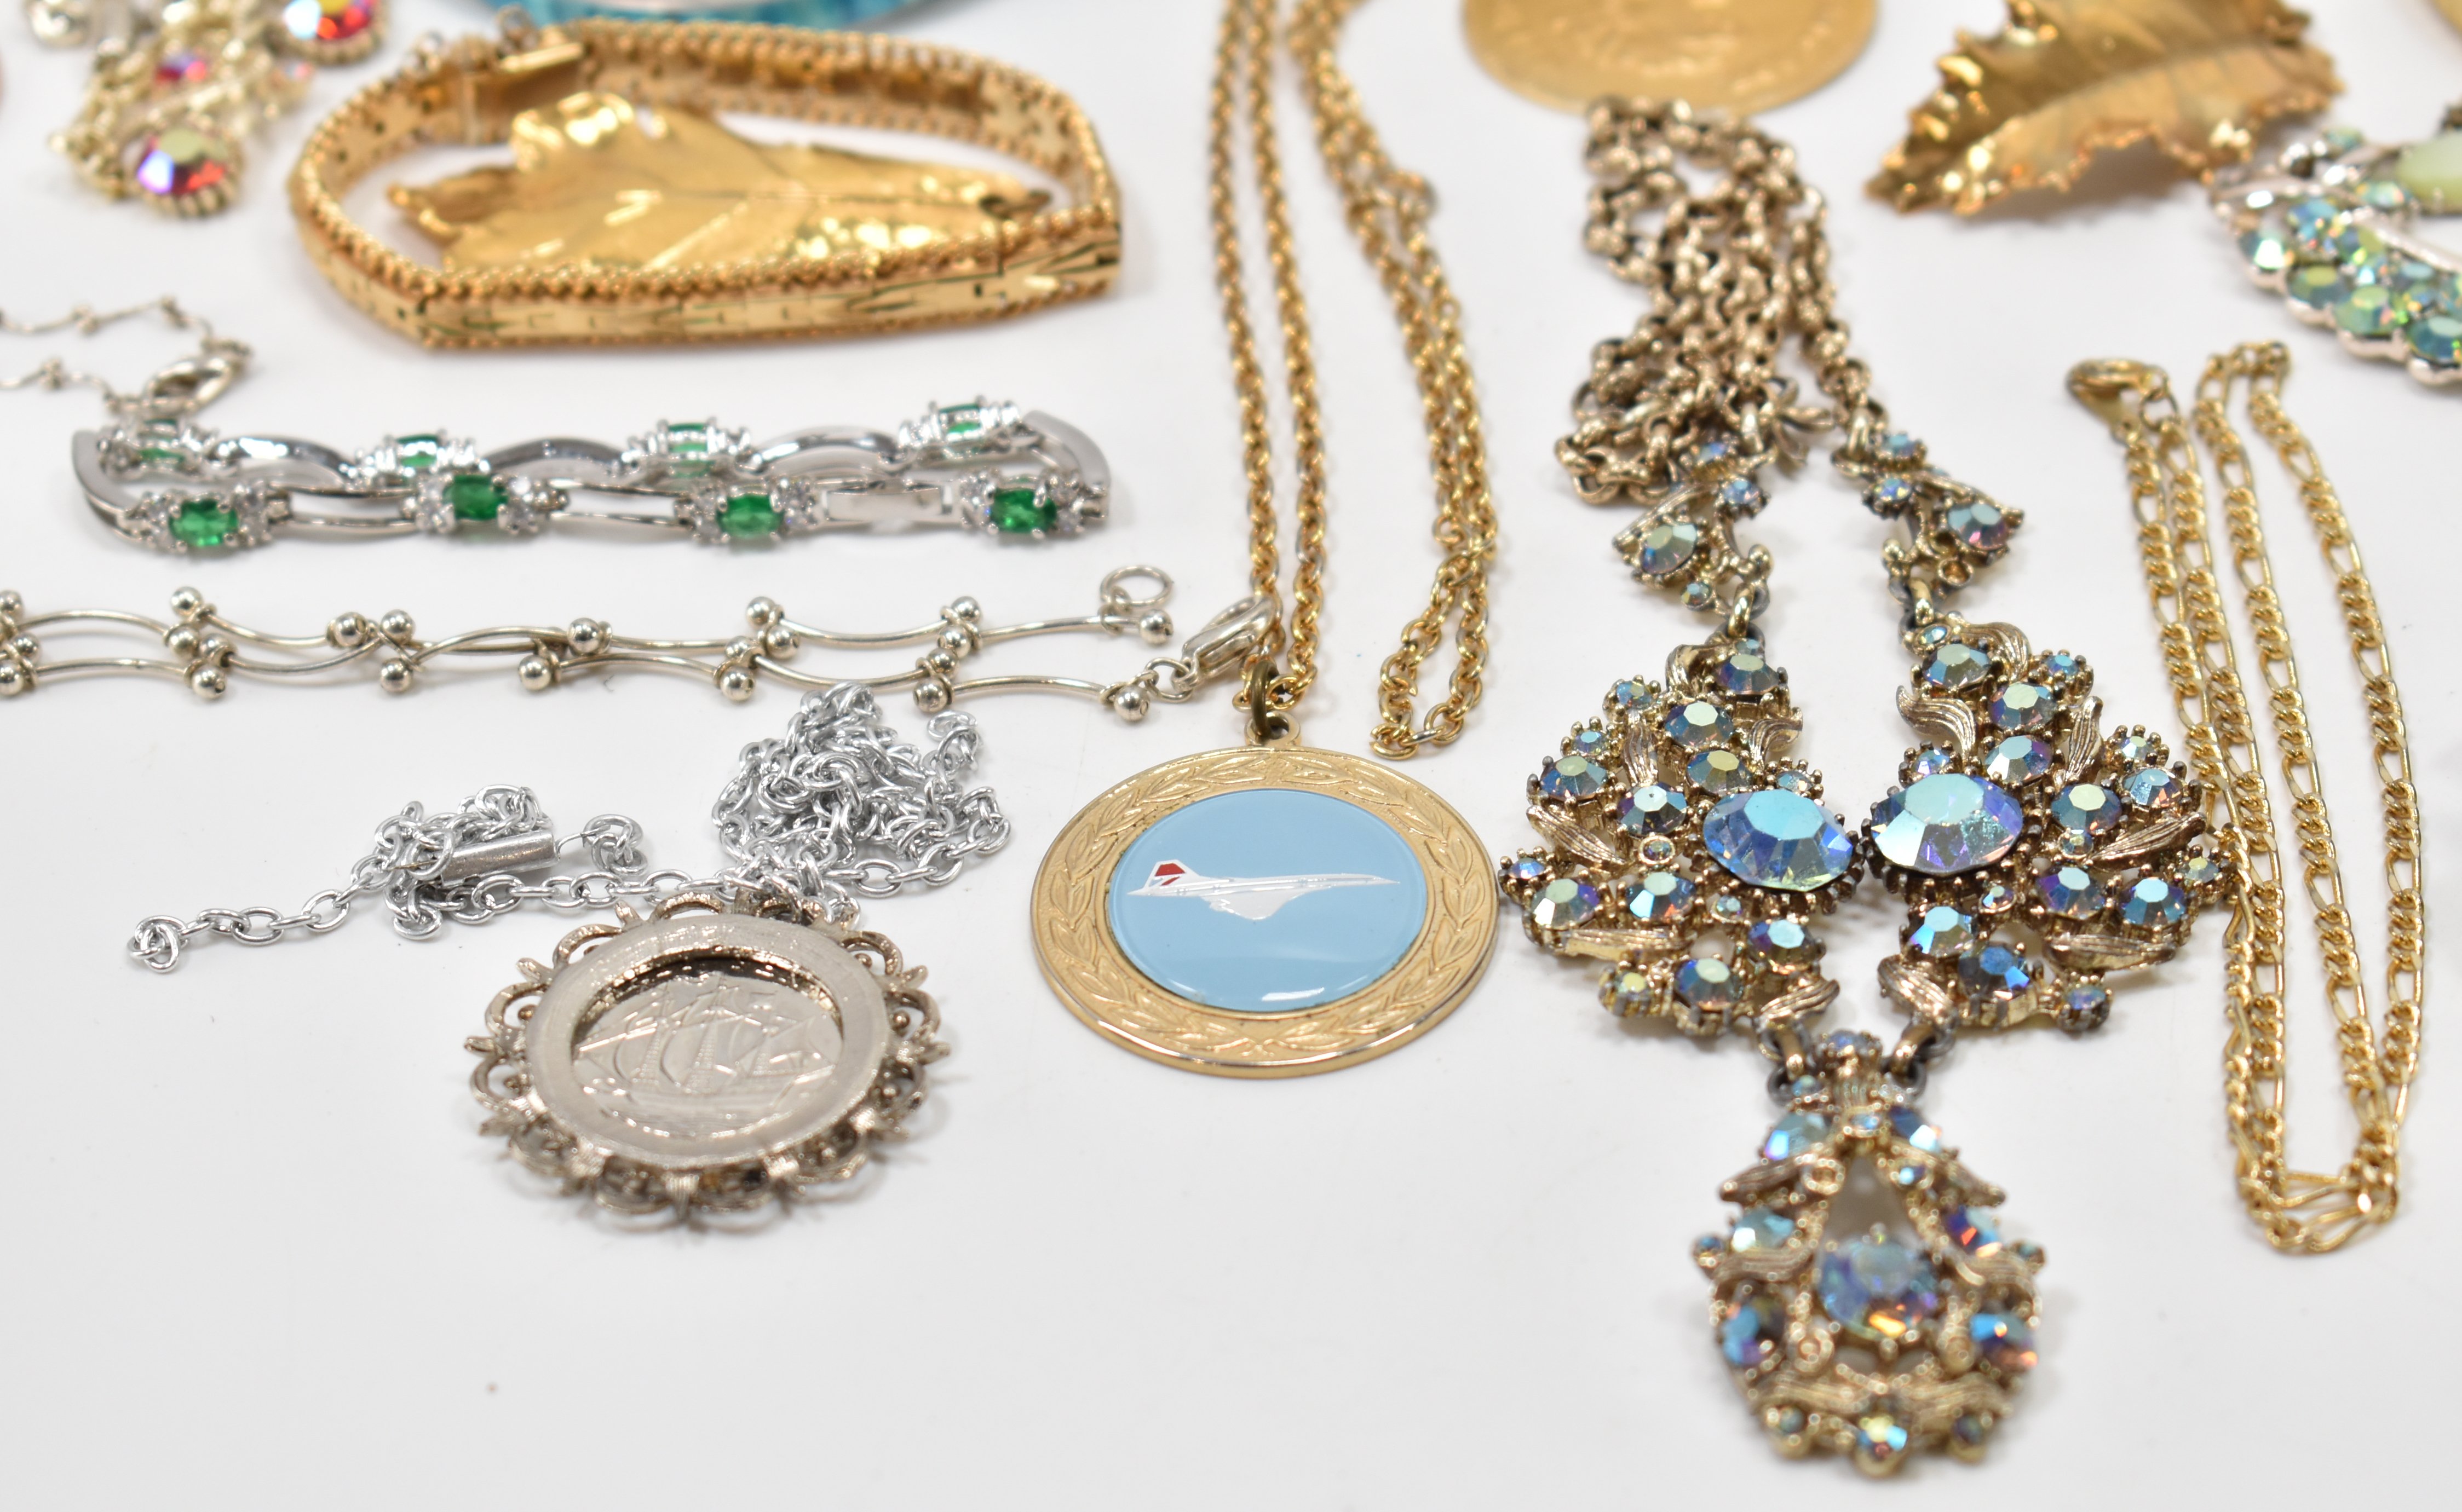 ASSORTMENT OF VINTAGE COSTUME JEWELLERY NECKLACES - Image 9 of 14